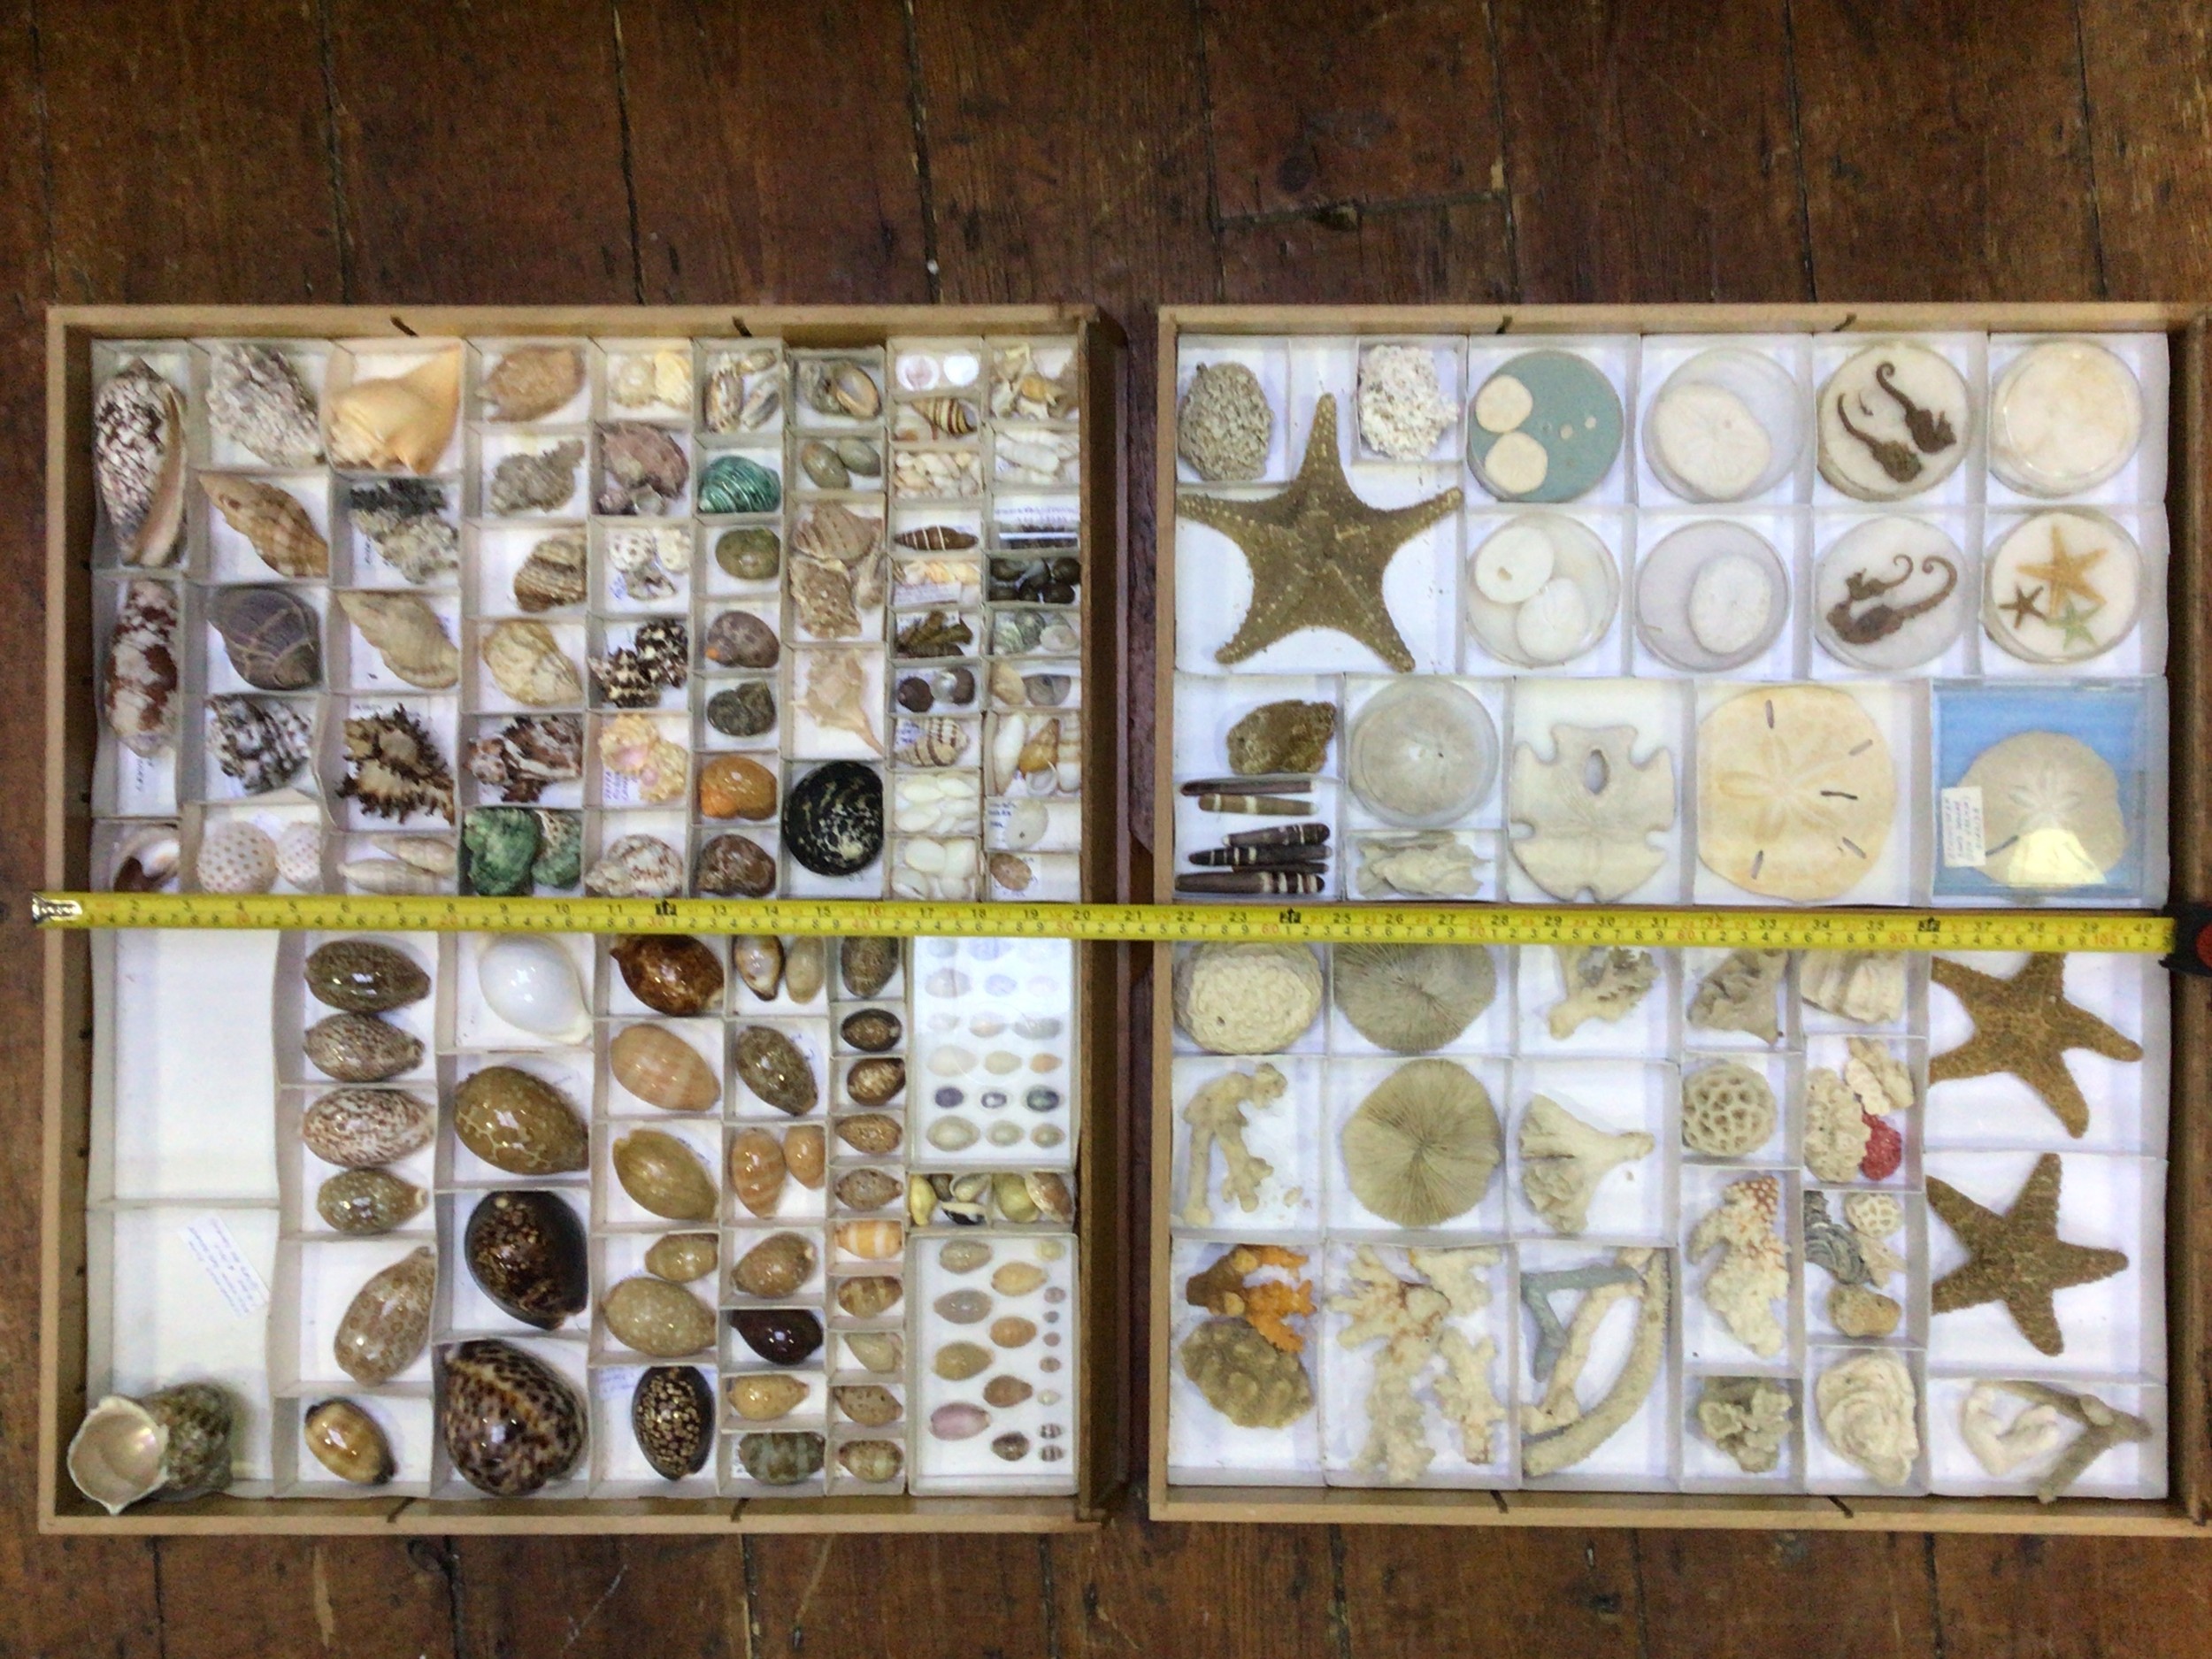 Two specimen trays of seashells, starfish, seahorses, corals and sea urchins etc. with handwritten